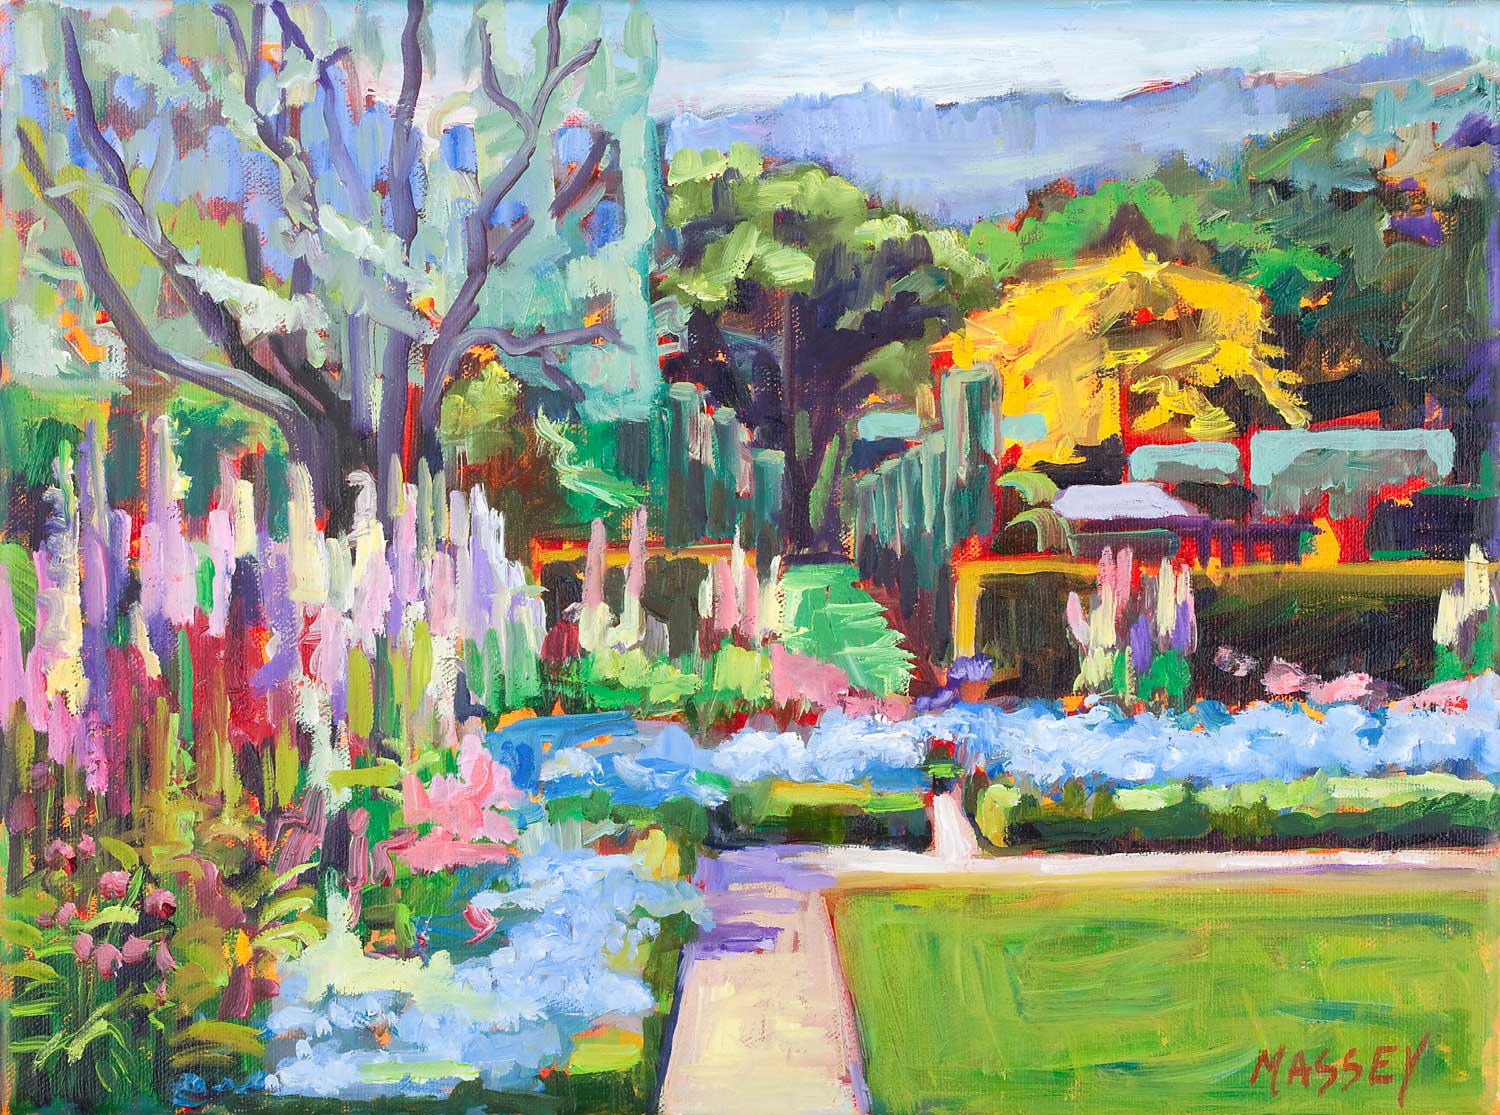 Forget Me Not, plein air, 11" x 14", oil on canvas